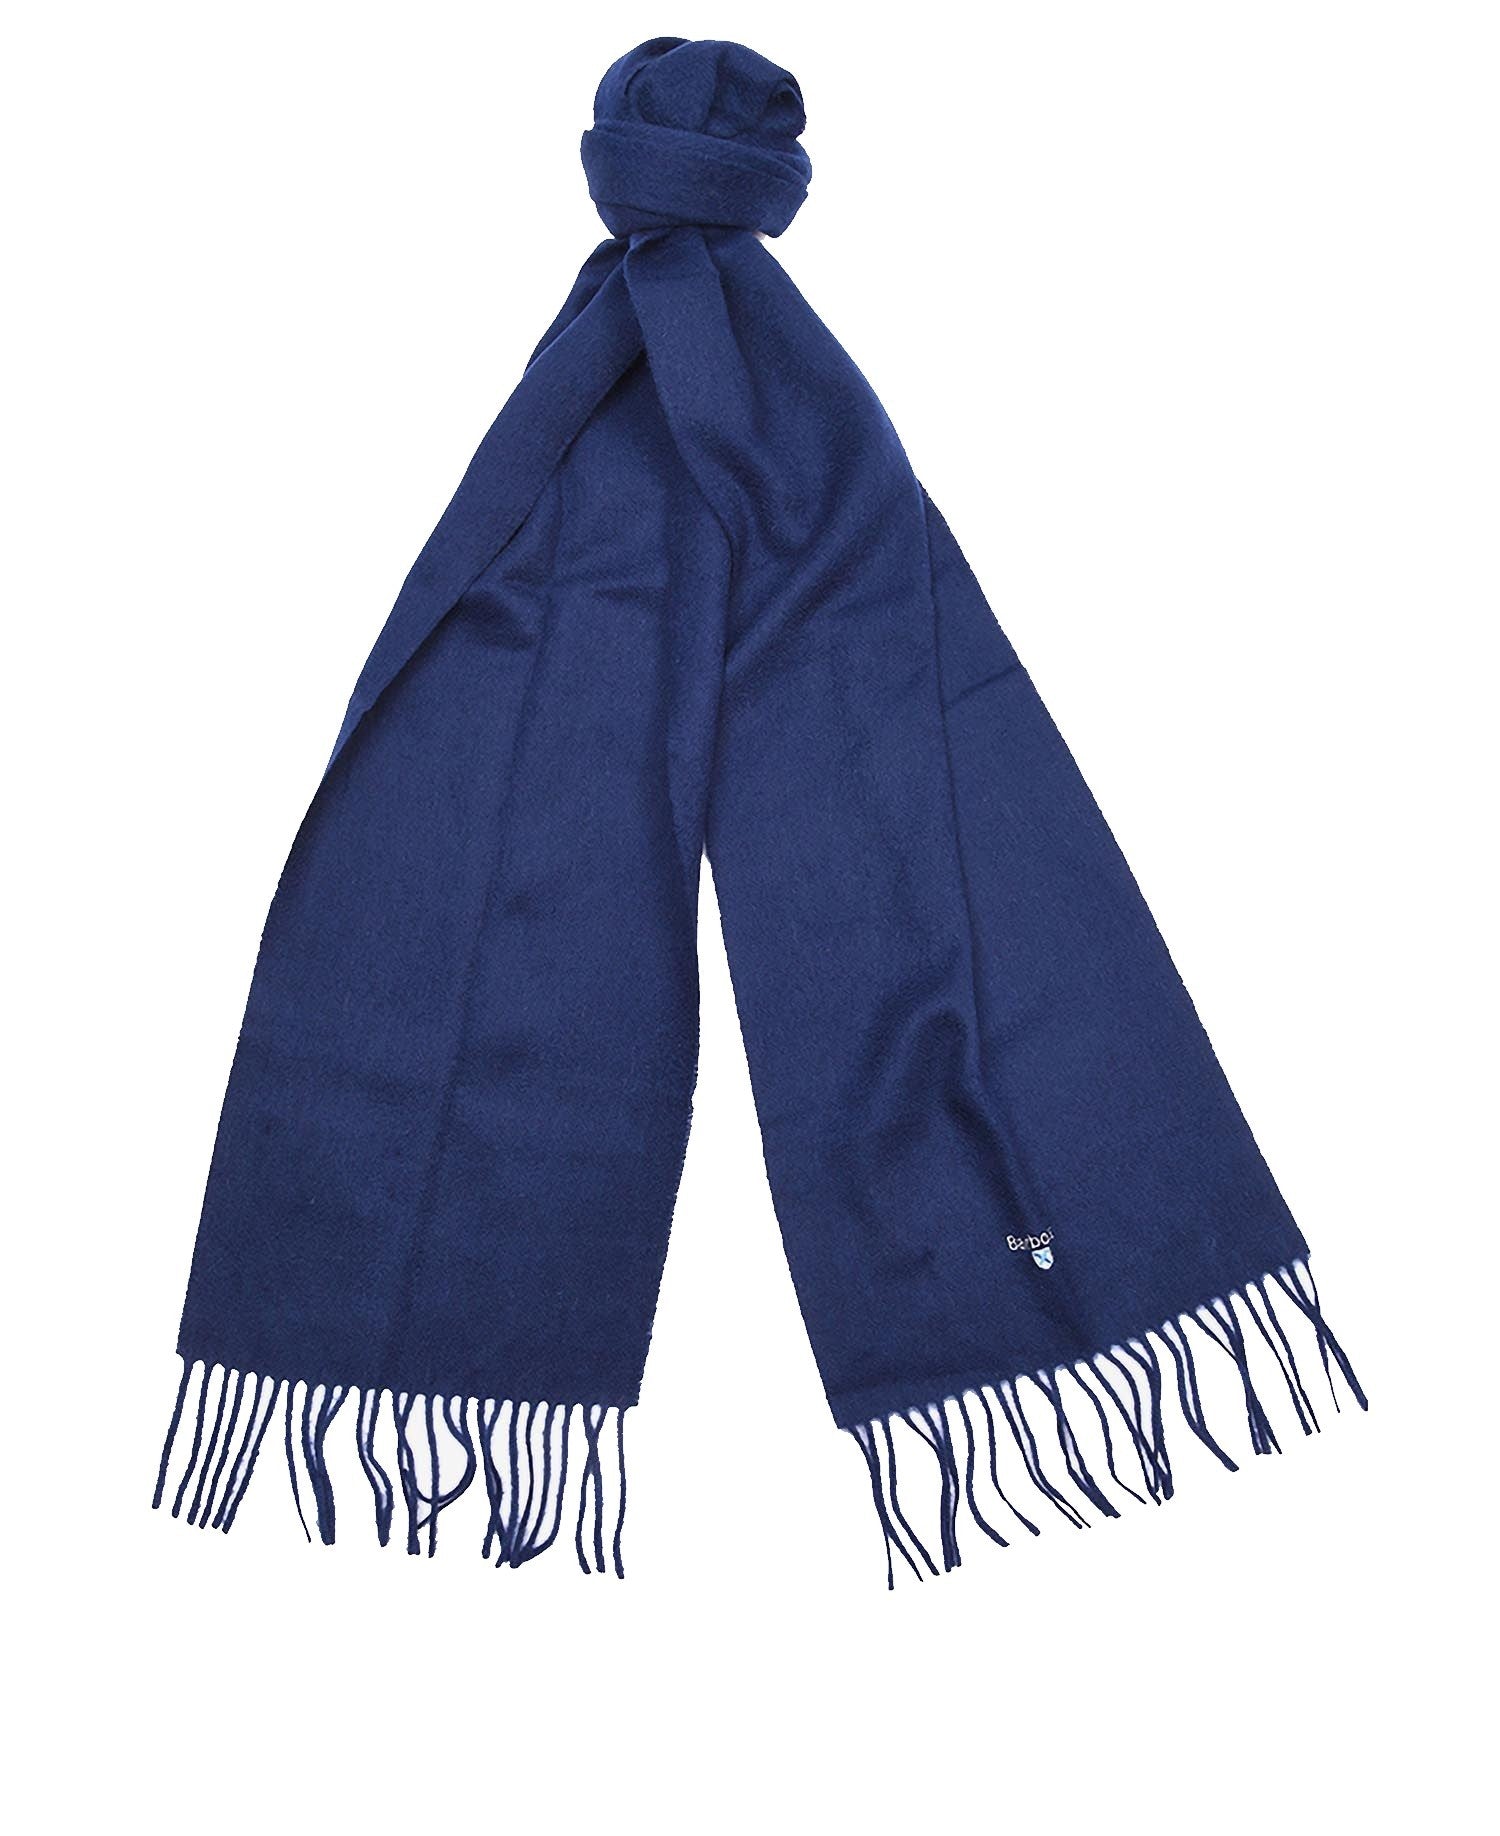 Barbour Plain Lambswool Scarf Navy